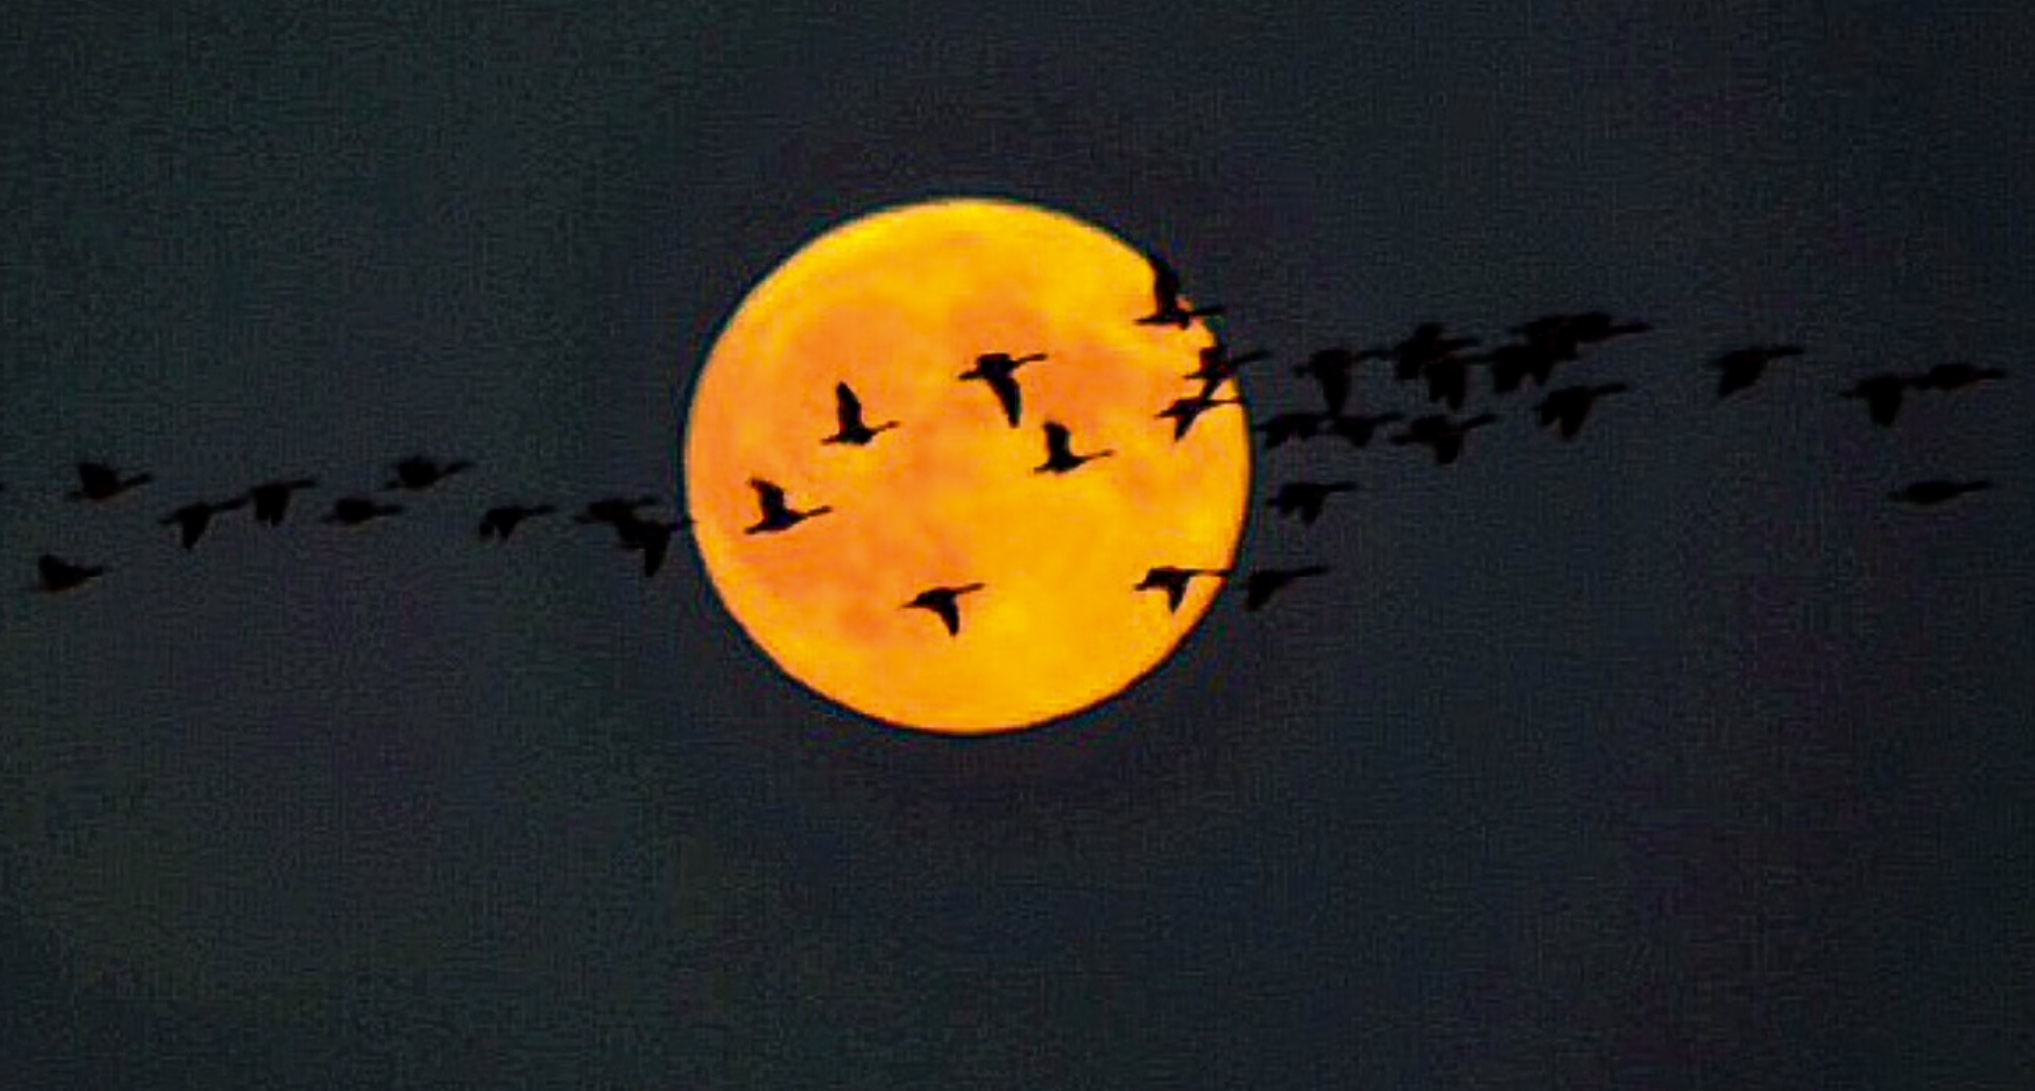 Geese and Supermoon